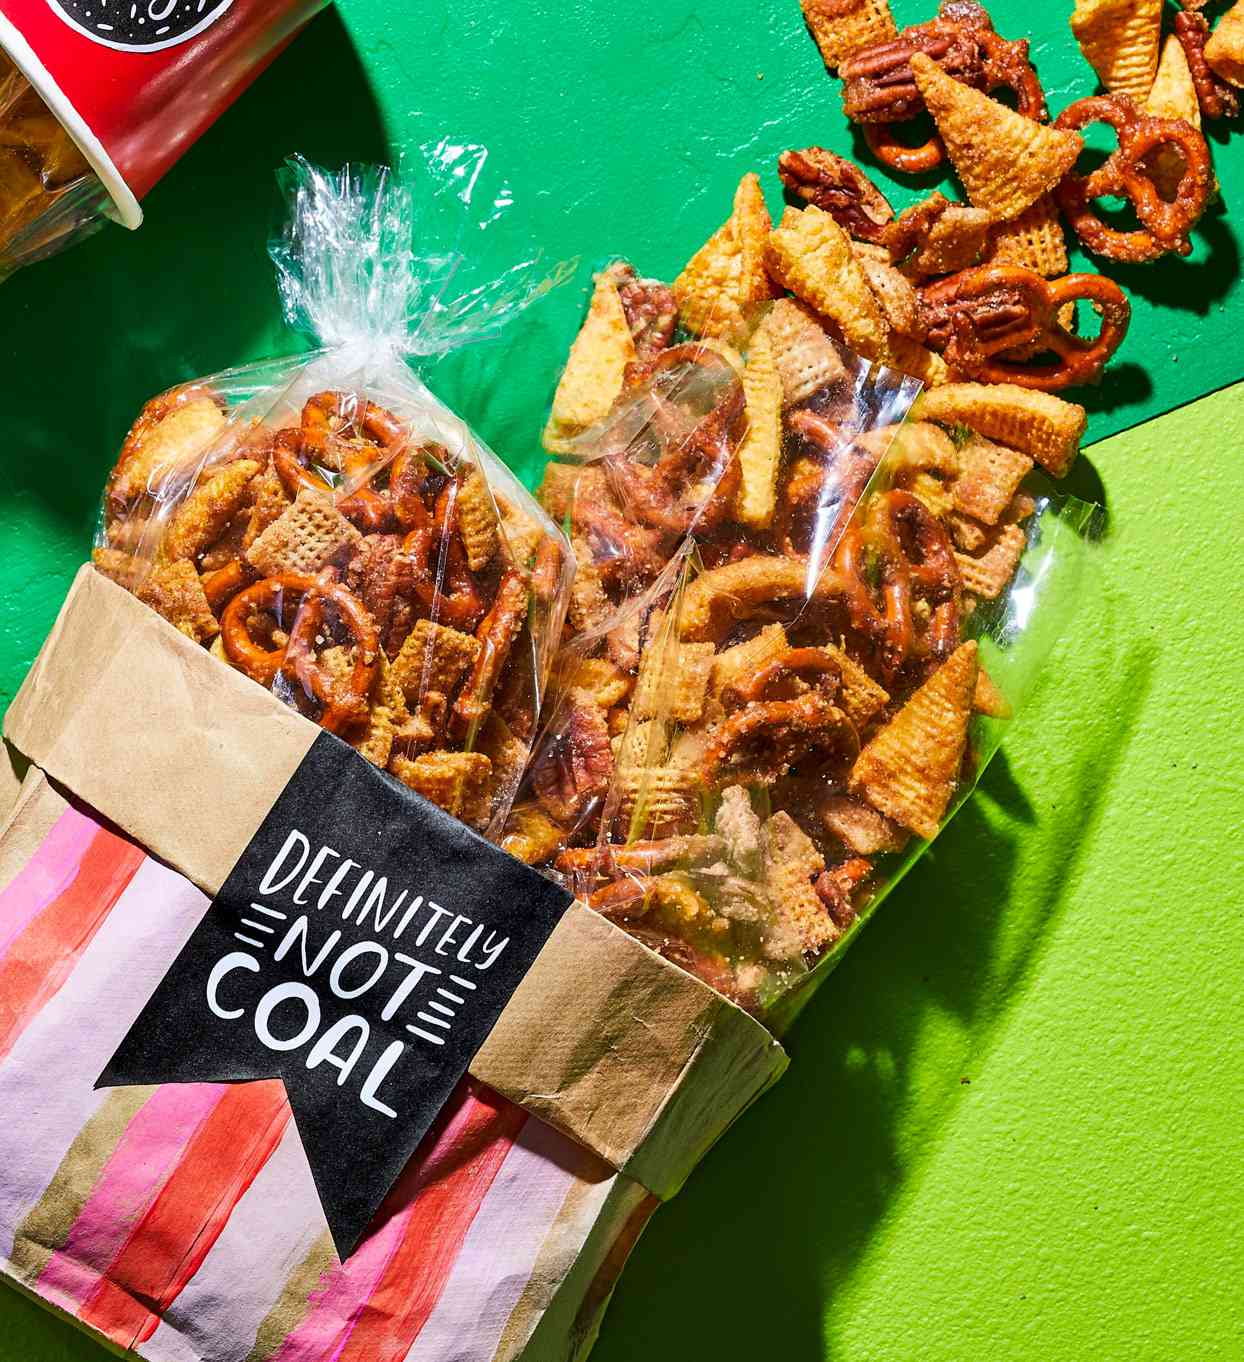 Cinnamon Churro Snack Mix spilling out of red containers on green background